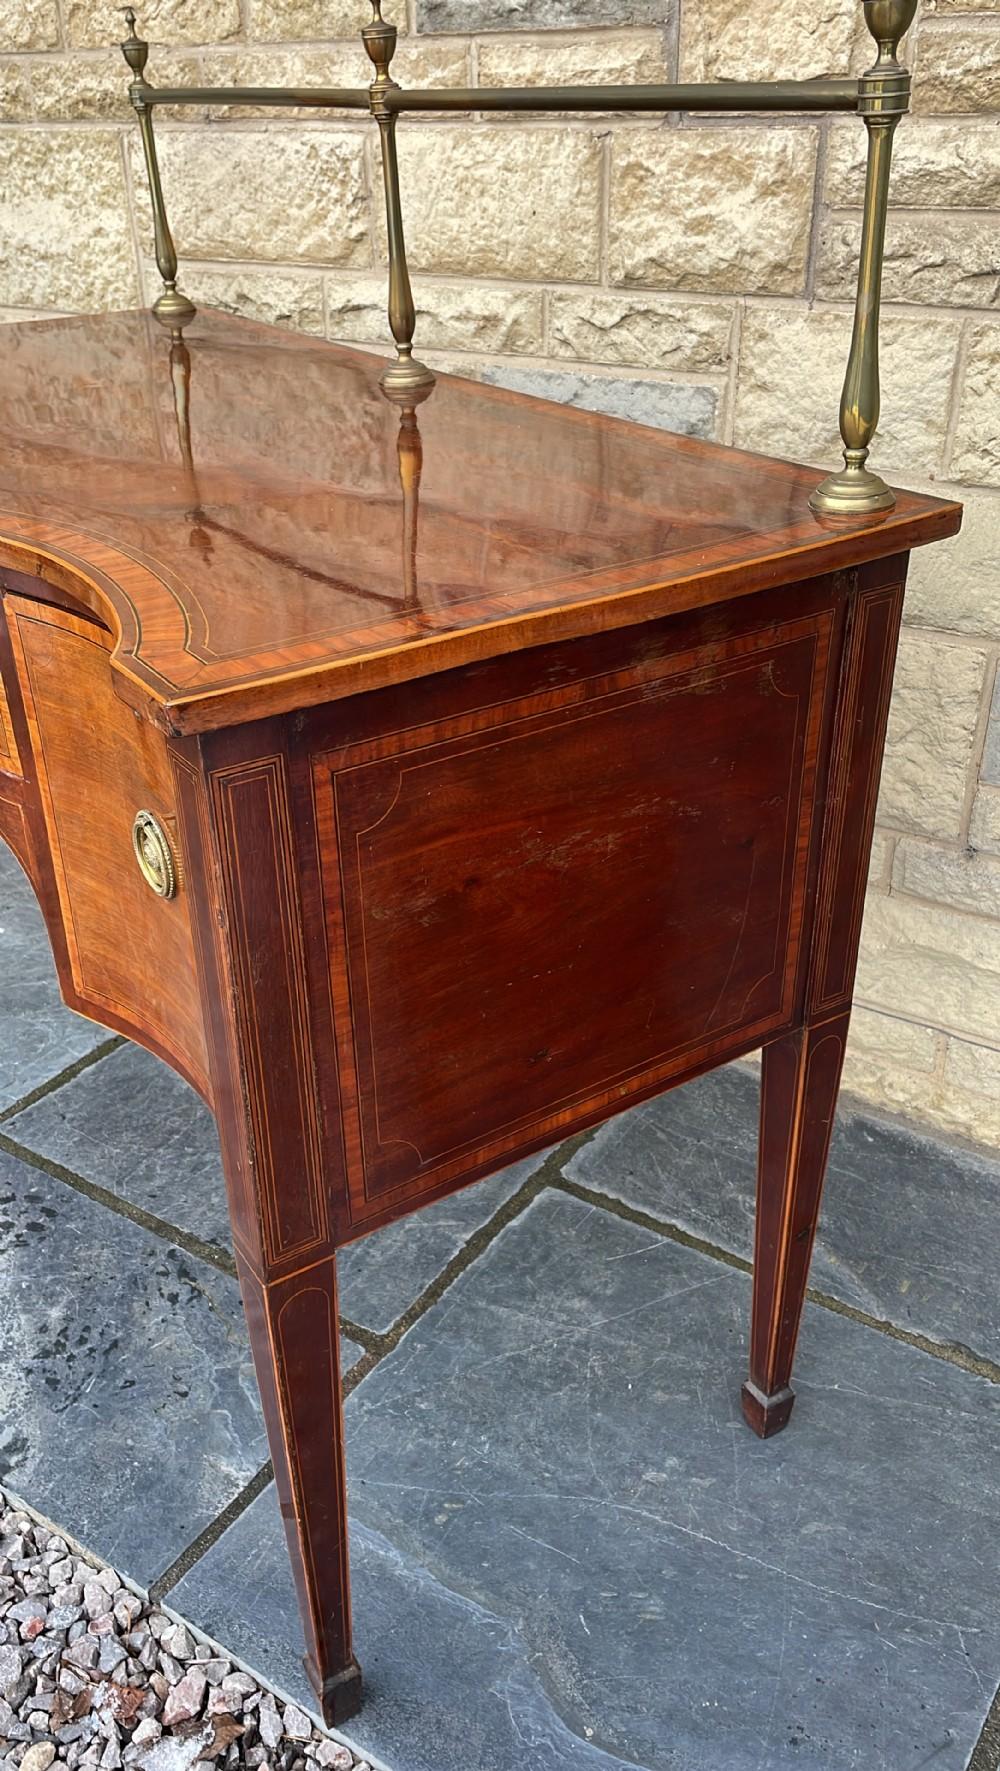  Early 19th C. English Inlaid Figured Mahogany Hepp. Style Serpentine Sideboard For Sale 6